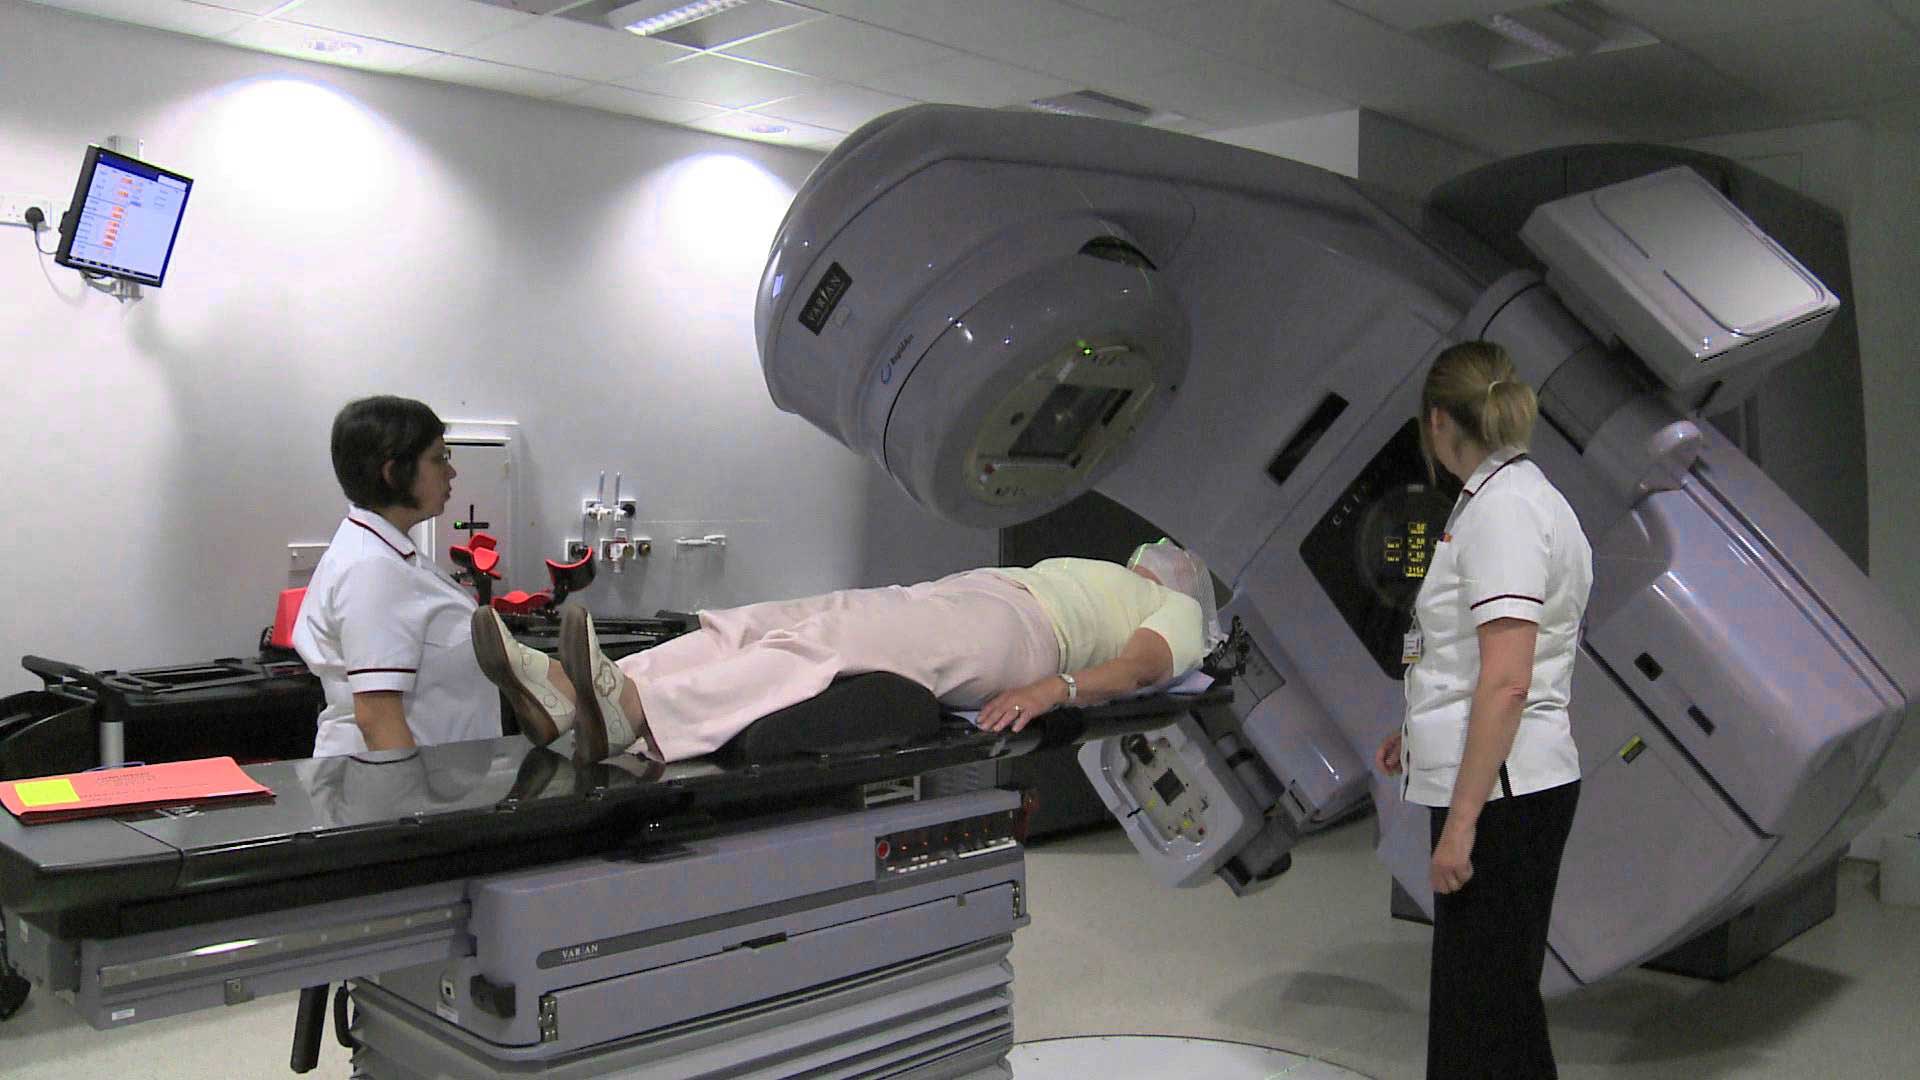 Radiology Treatment In India